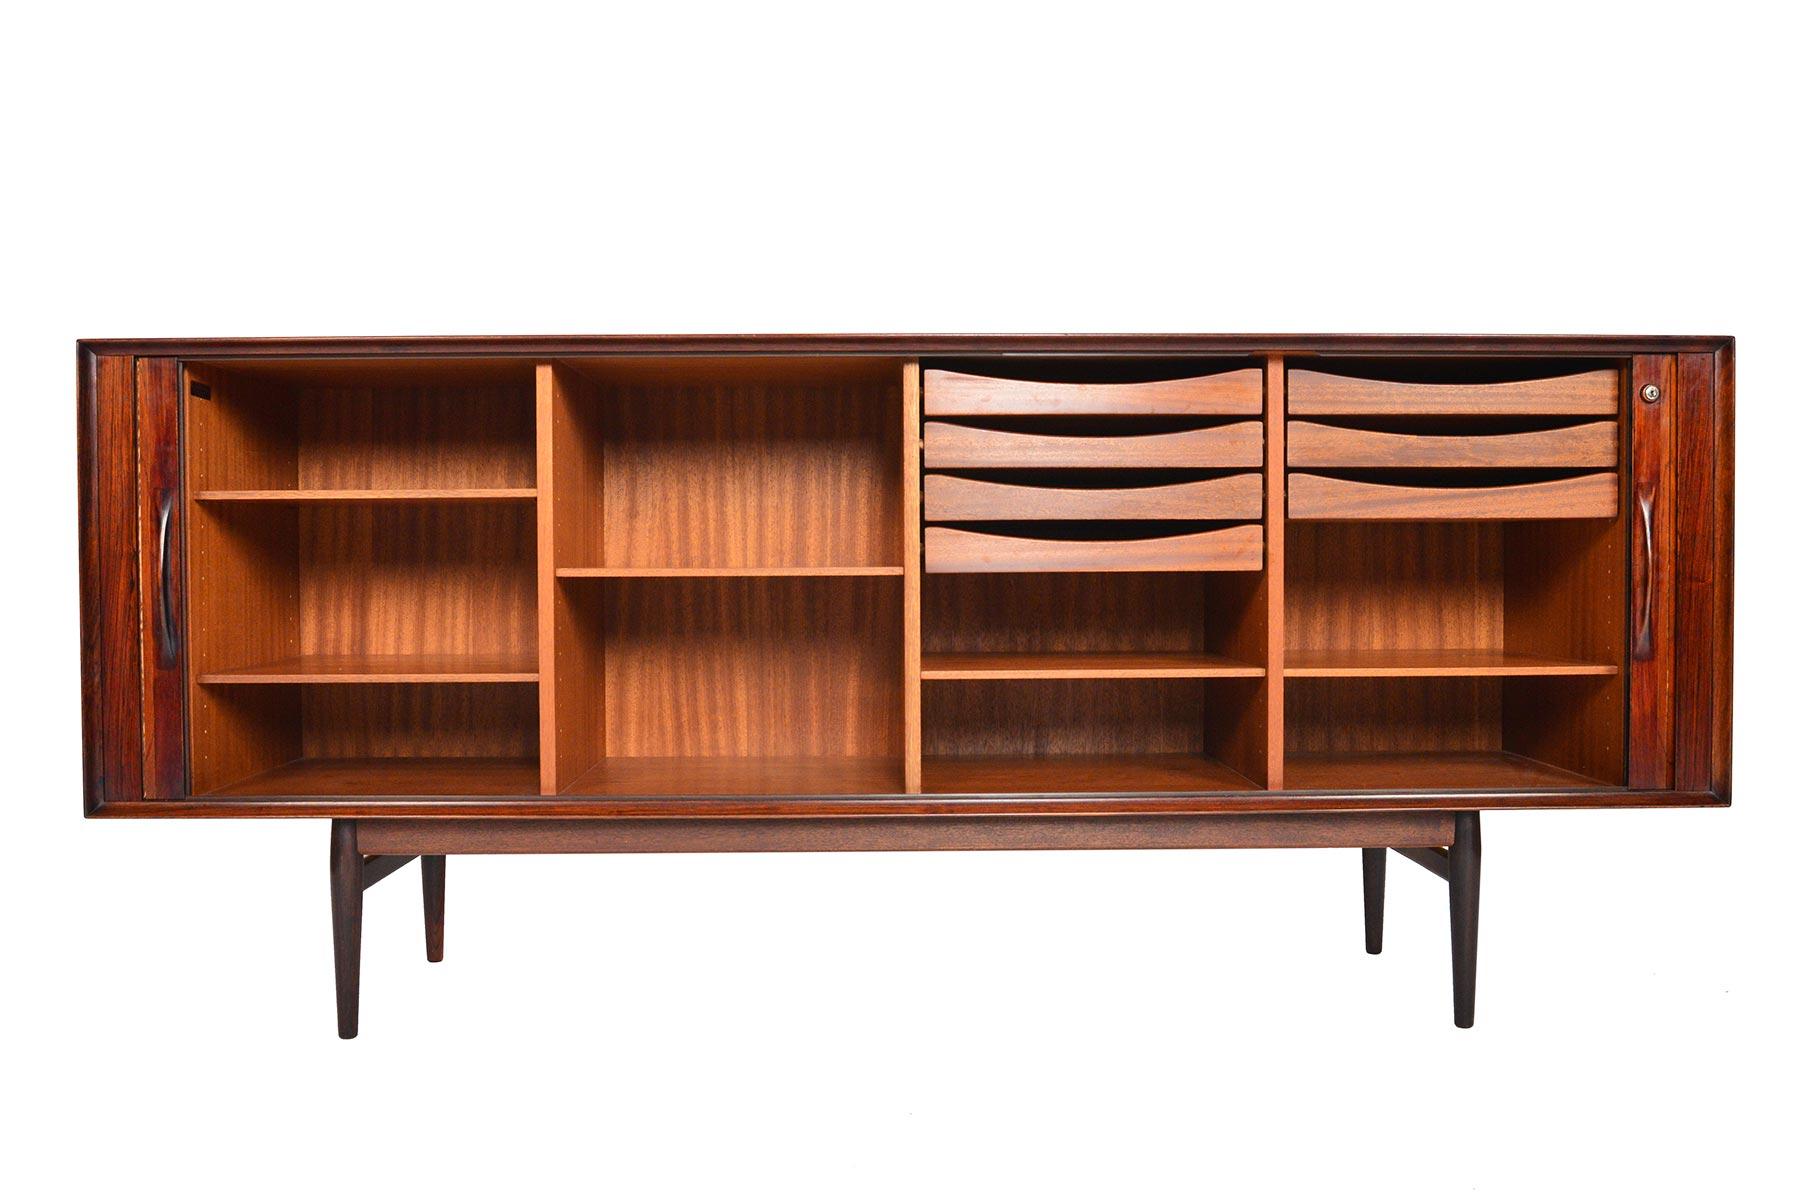 This Danish modern large Brazilian rosewood tambour door credenza was designed by Arne Vodder for Sibast and features a sleek profile and ample storage! The smooth running tambour doors open to reveal four bays outfitted with seven drawers and five